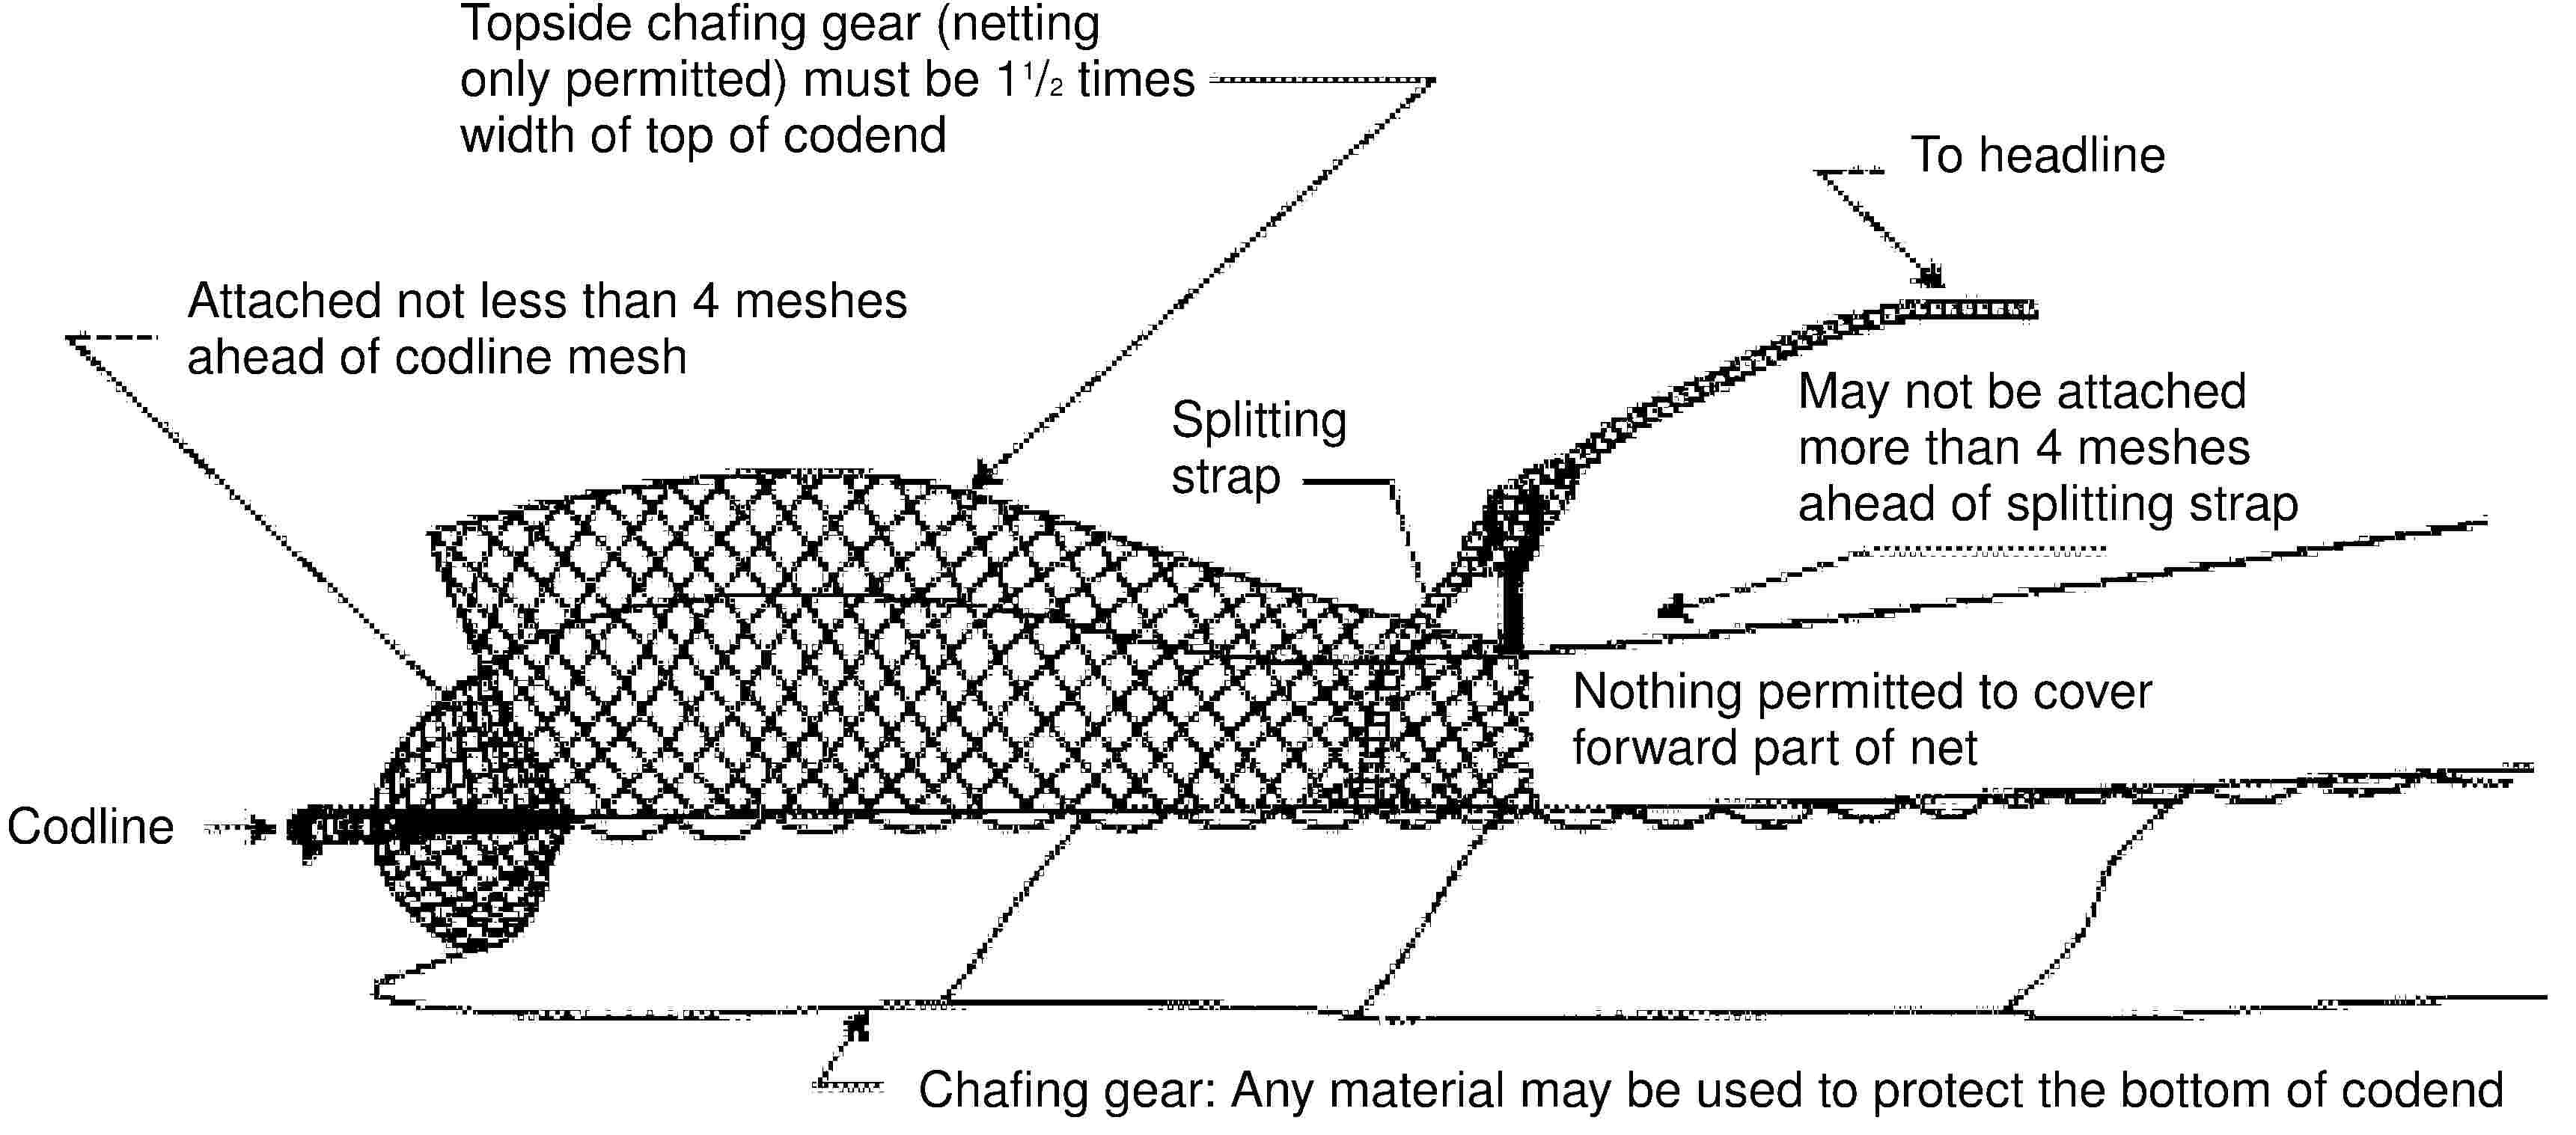 Topside chafing gear (netting only permitted) must be 11/2 times width of top of codendTo headlineAttached not less than 4 meshes ahead of codline meshSplitting strapMay not be attached more than 4 meshes ahead of splitting strapNothing permitted to cover forward part of netCodlineChafing gear: Any material may be used to protect the bottom of codend